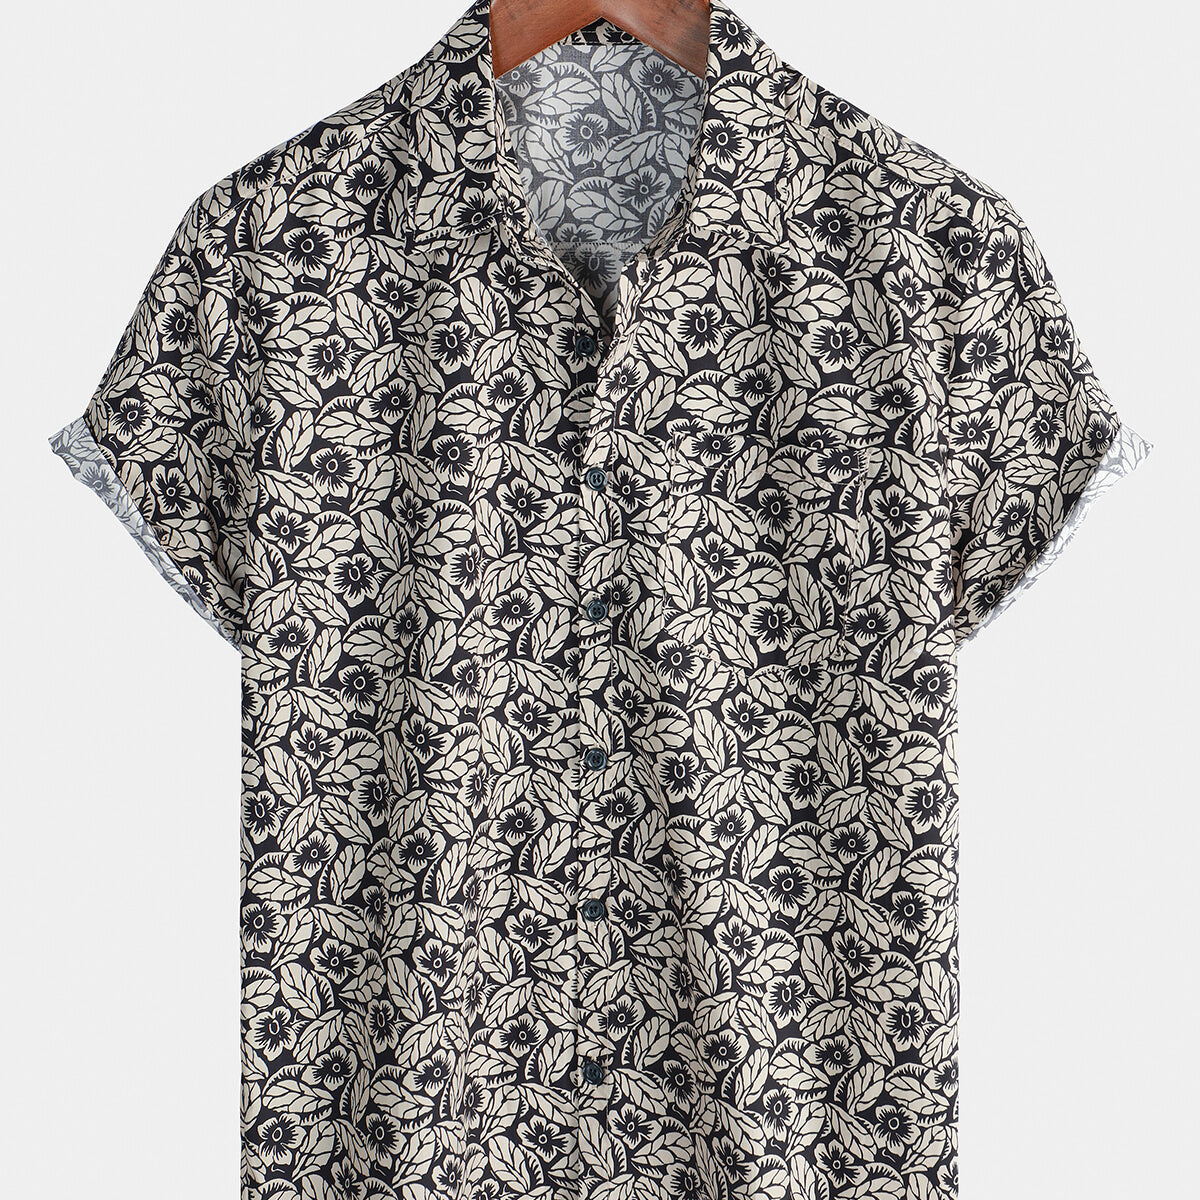 Men's Vintage Floral Holiday Cotton Button Up Short Sleeve Shirt